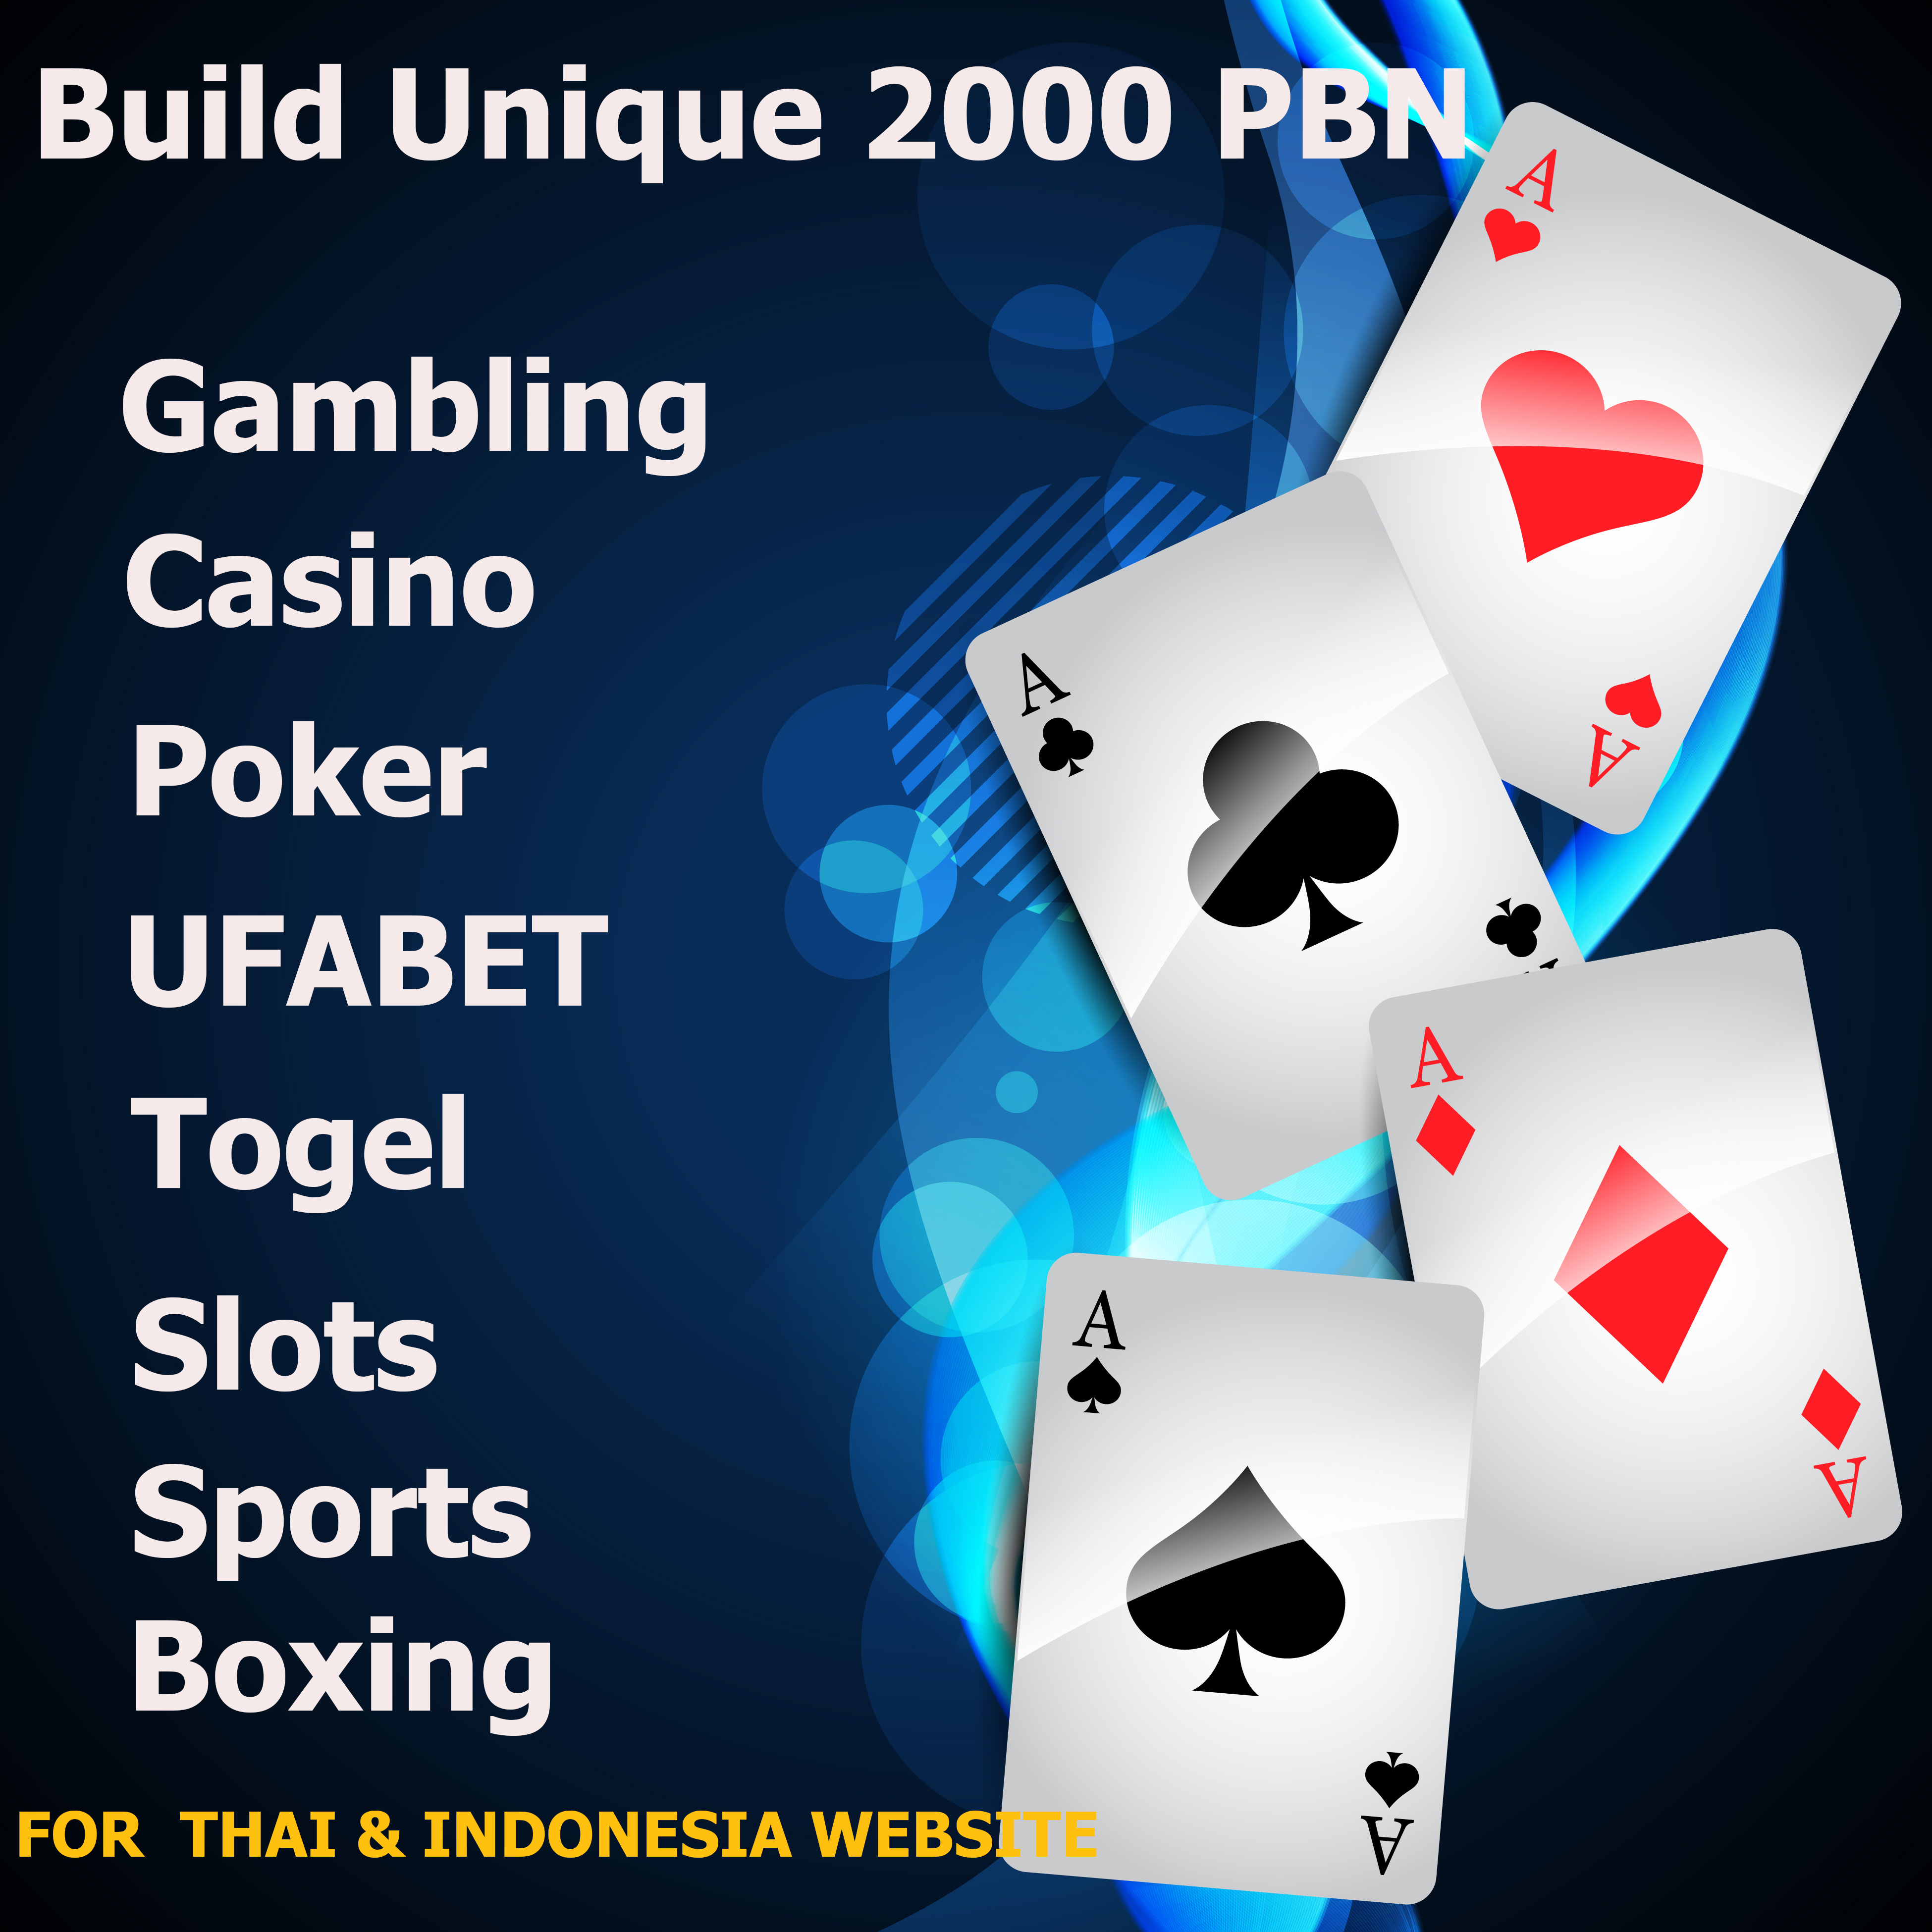 Guaranteed 1st Page,Skyrocket 2000 PBN,Thai & Indonesia Website,DR70+-Casino,Ufabet,Poker,Togel,Site